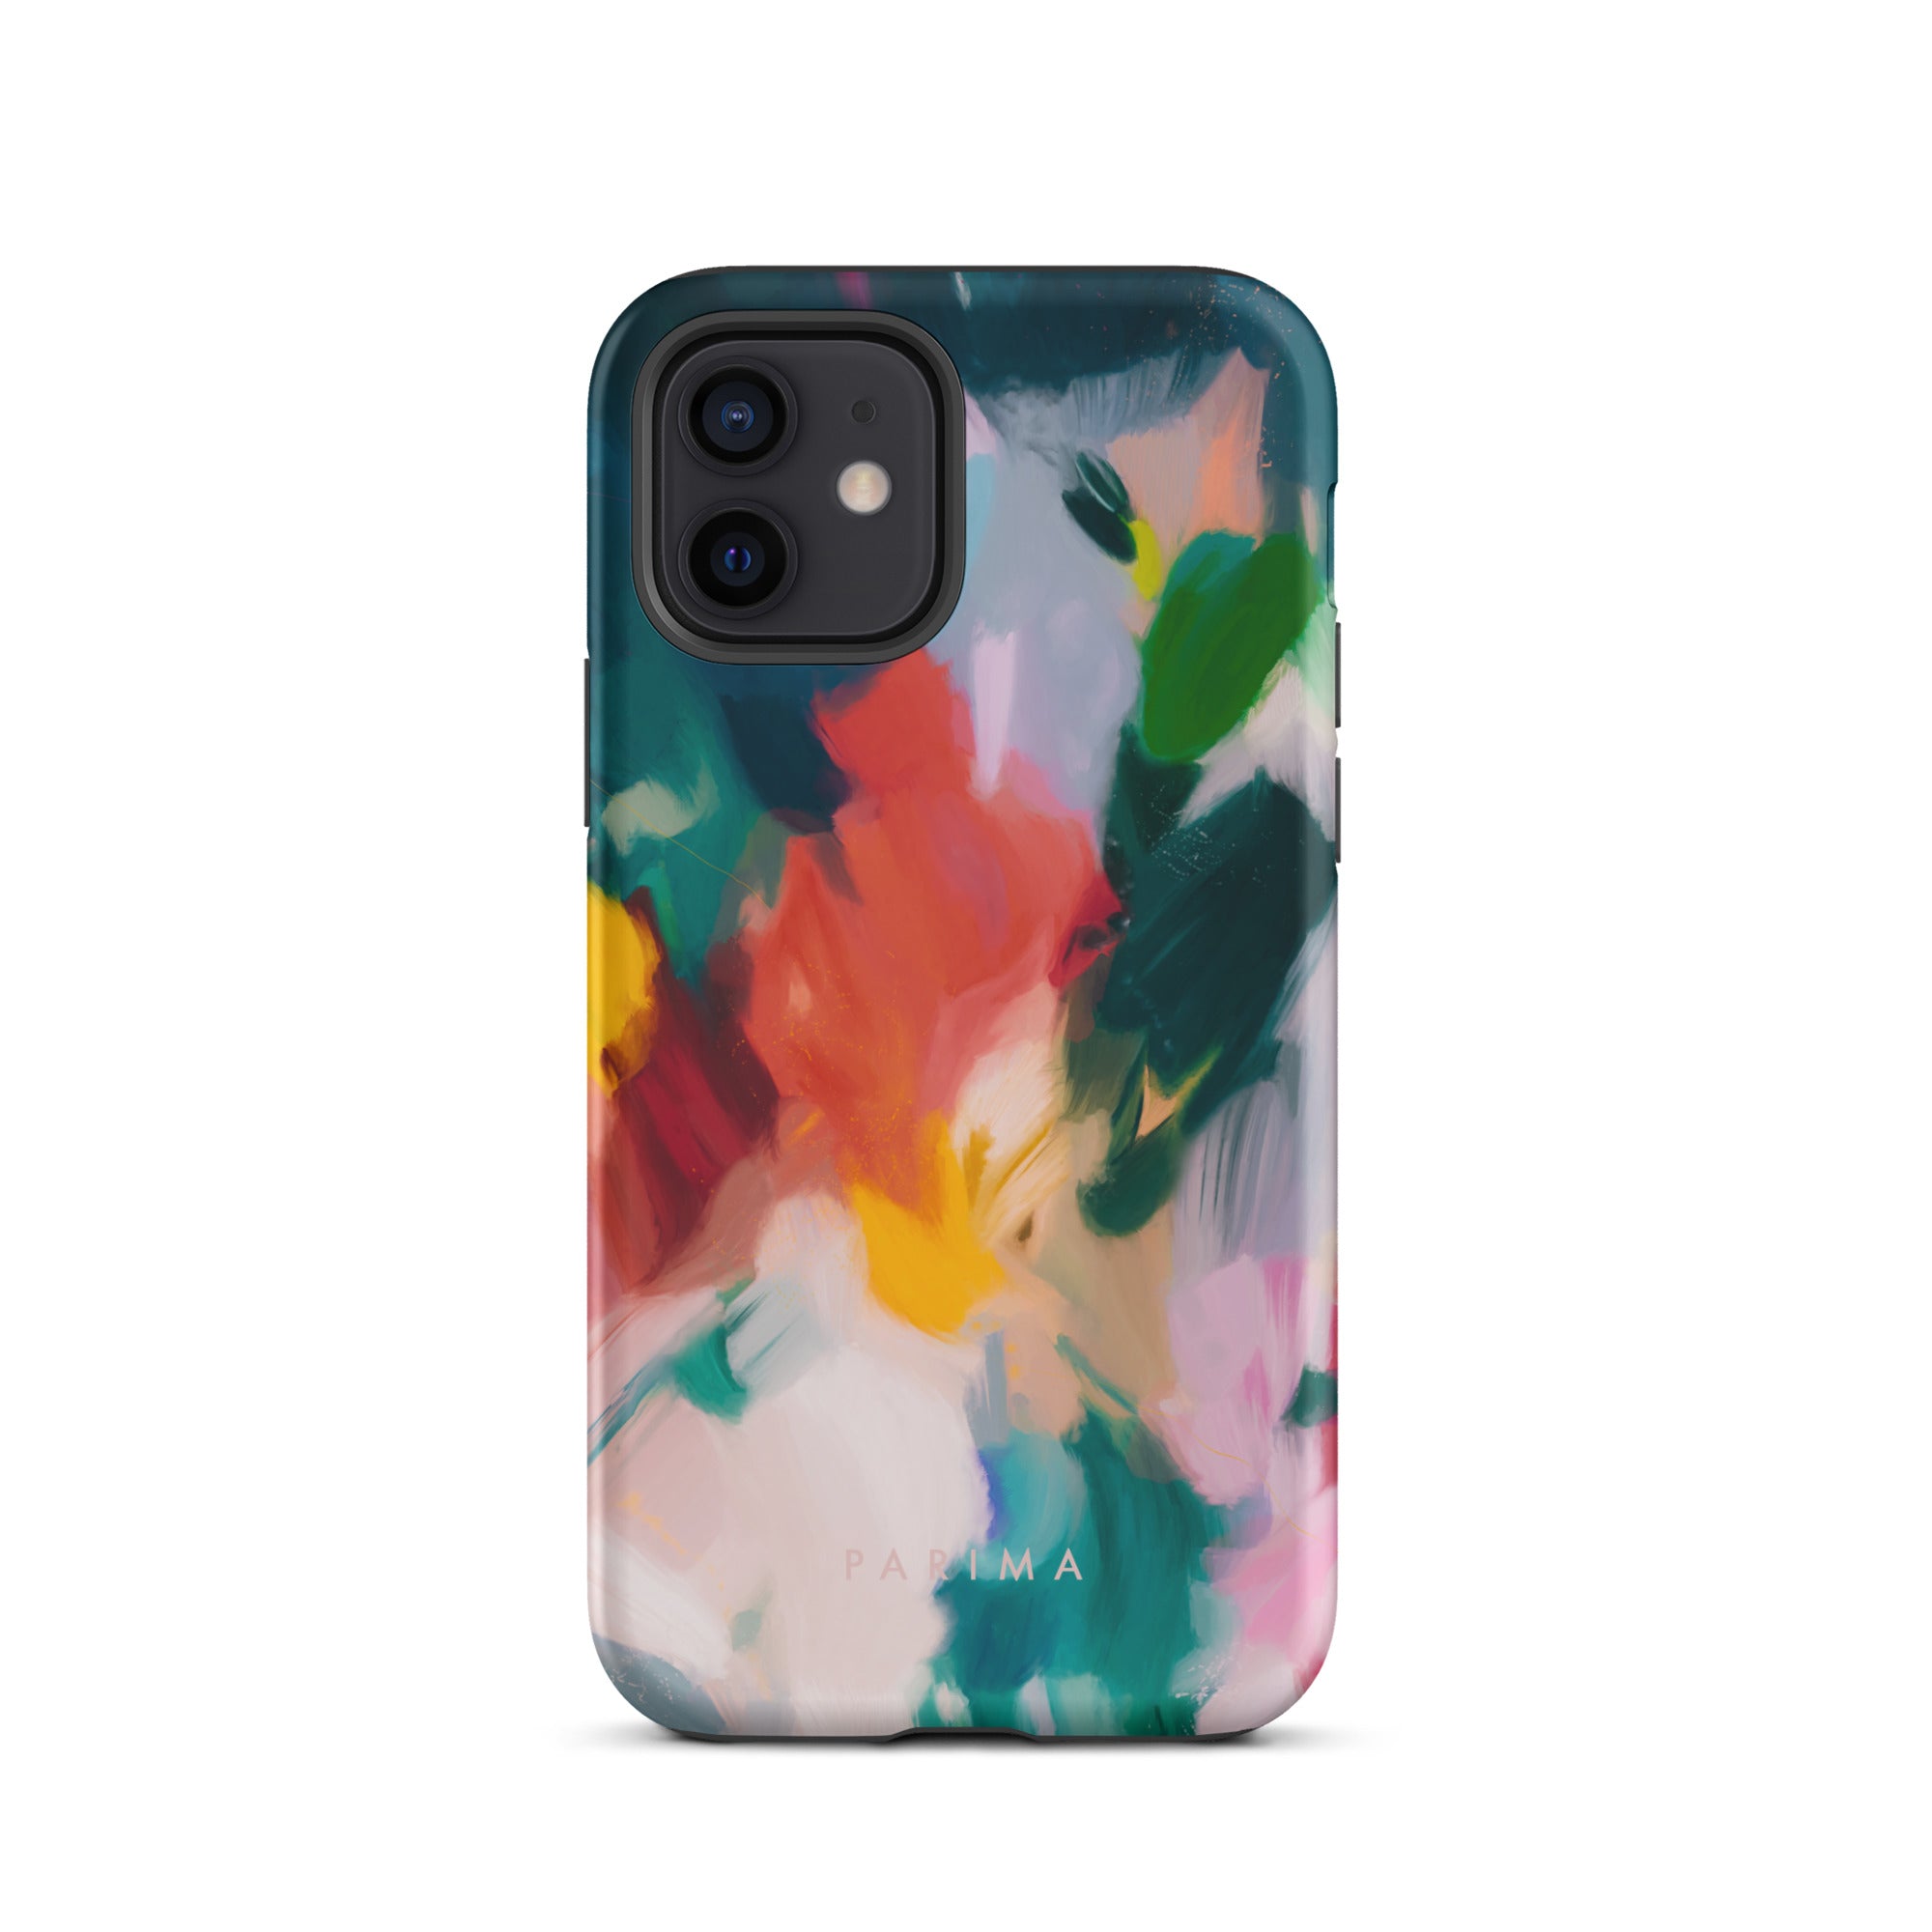 Pomme, blue and red abstract art on iPhone 12 tough case by Parima Studio